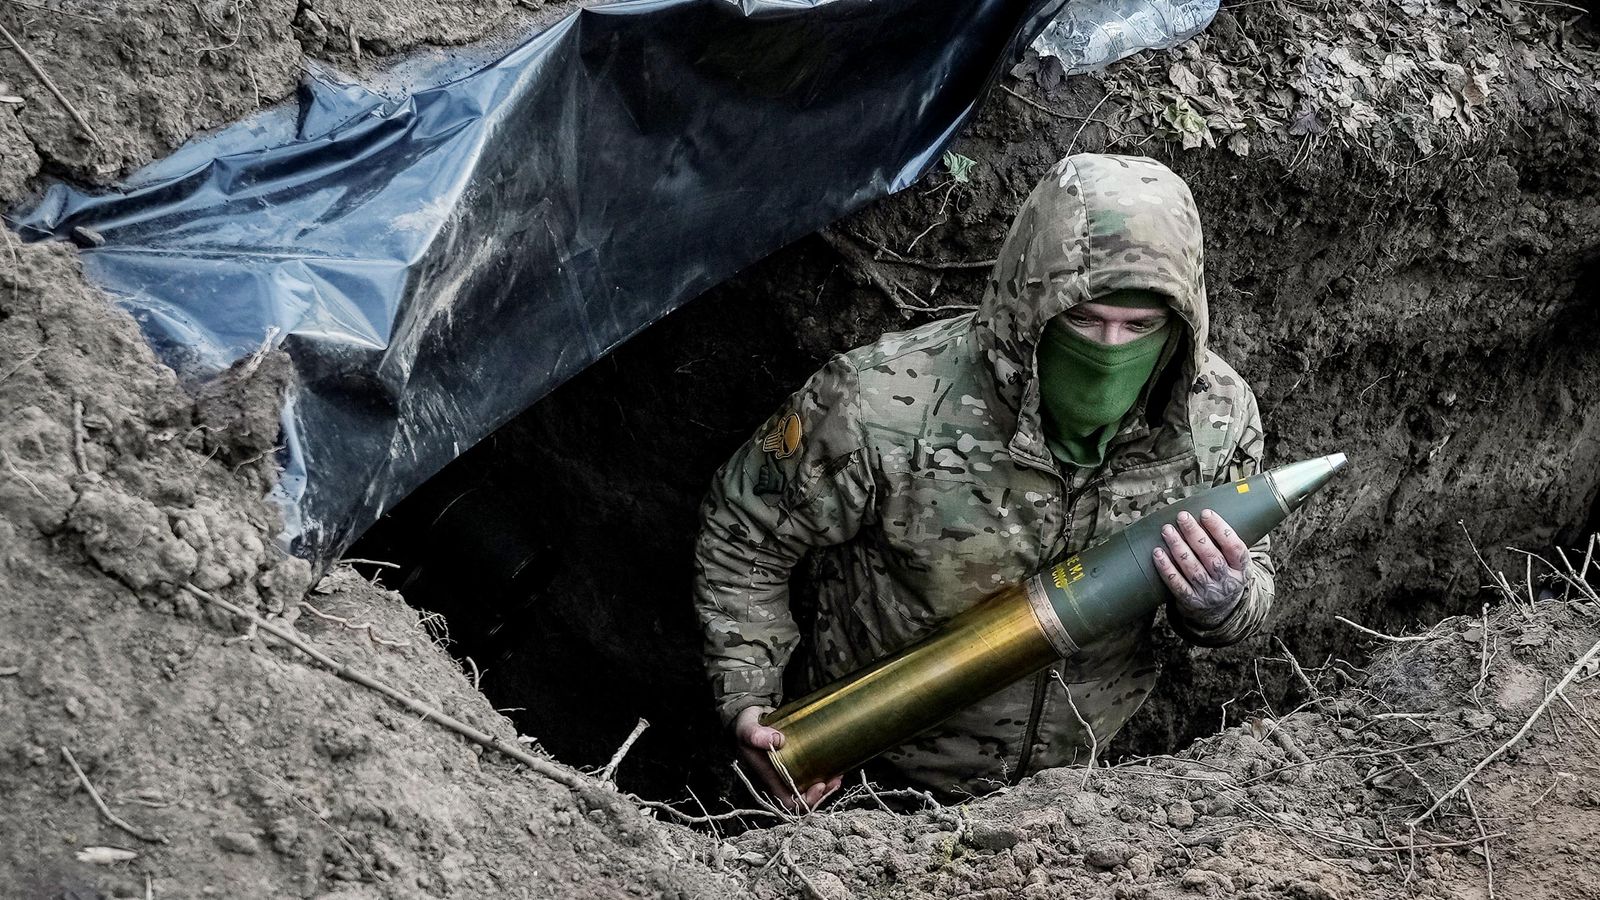 Russia using chemical choking agents against Ukrainian troops, US claims